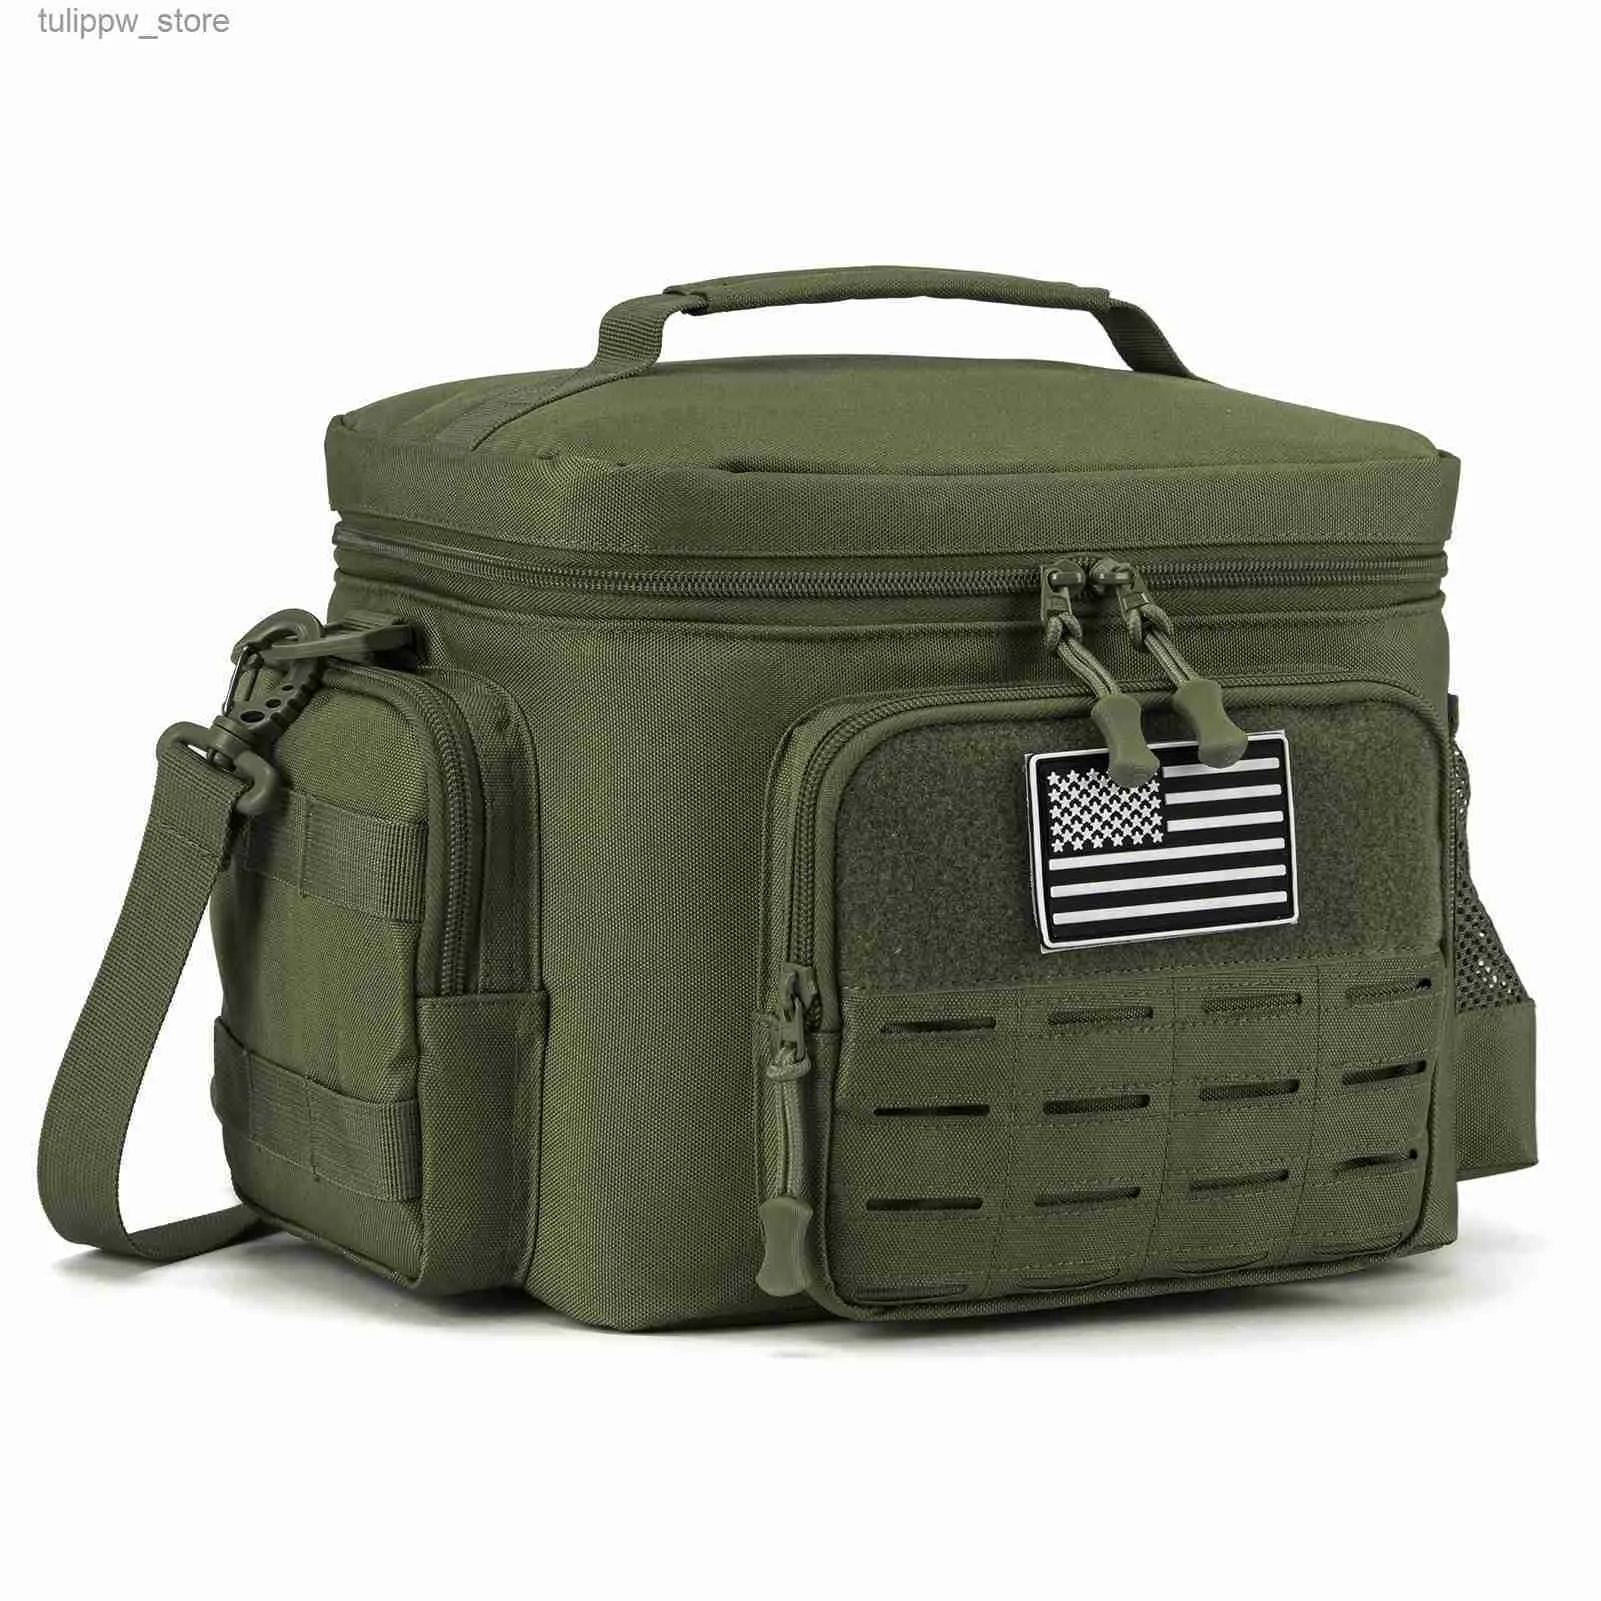 Bento Boxes Tactical Lunch Box for Men Military Heavy Duty Lunch Bag Work Leakproof Insulated Durable Thermal Cooler Bag Meal Camping Picnic L0311